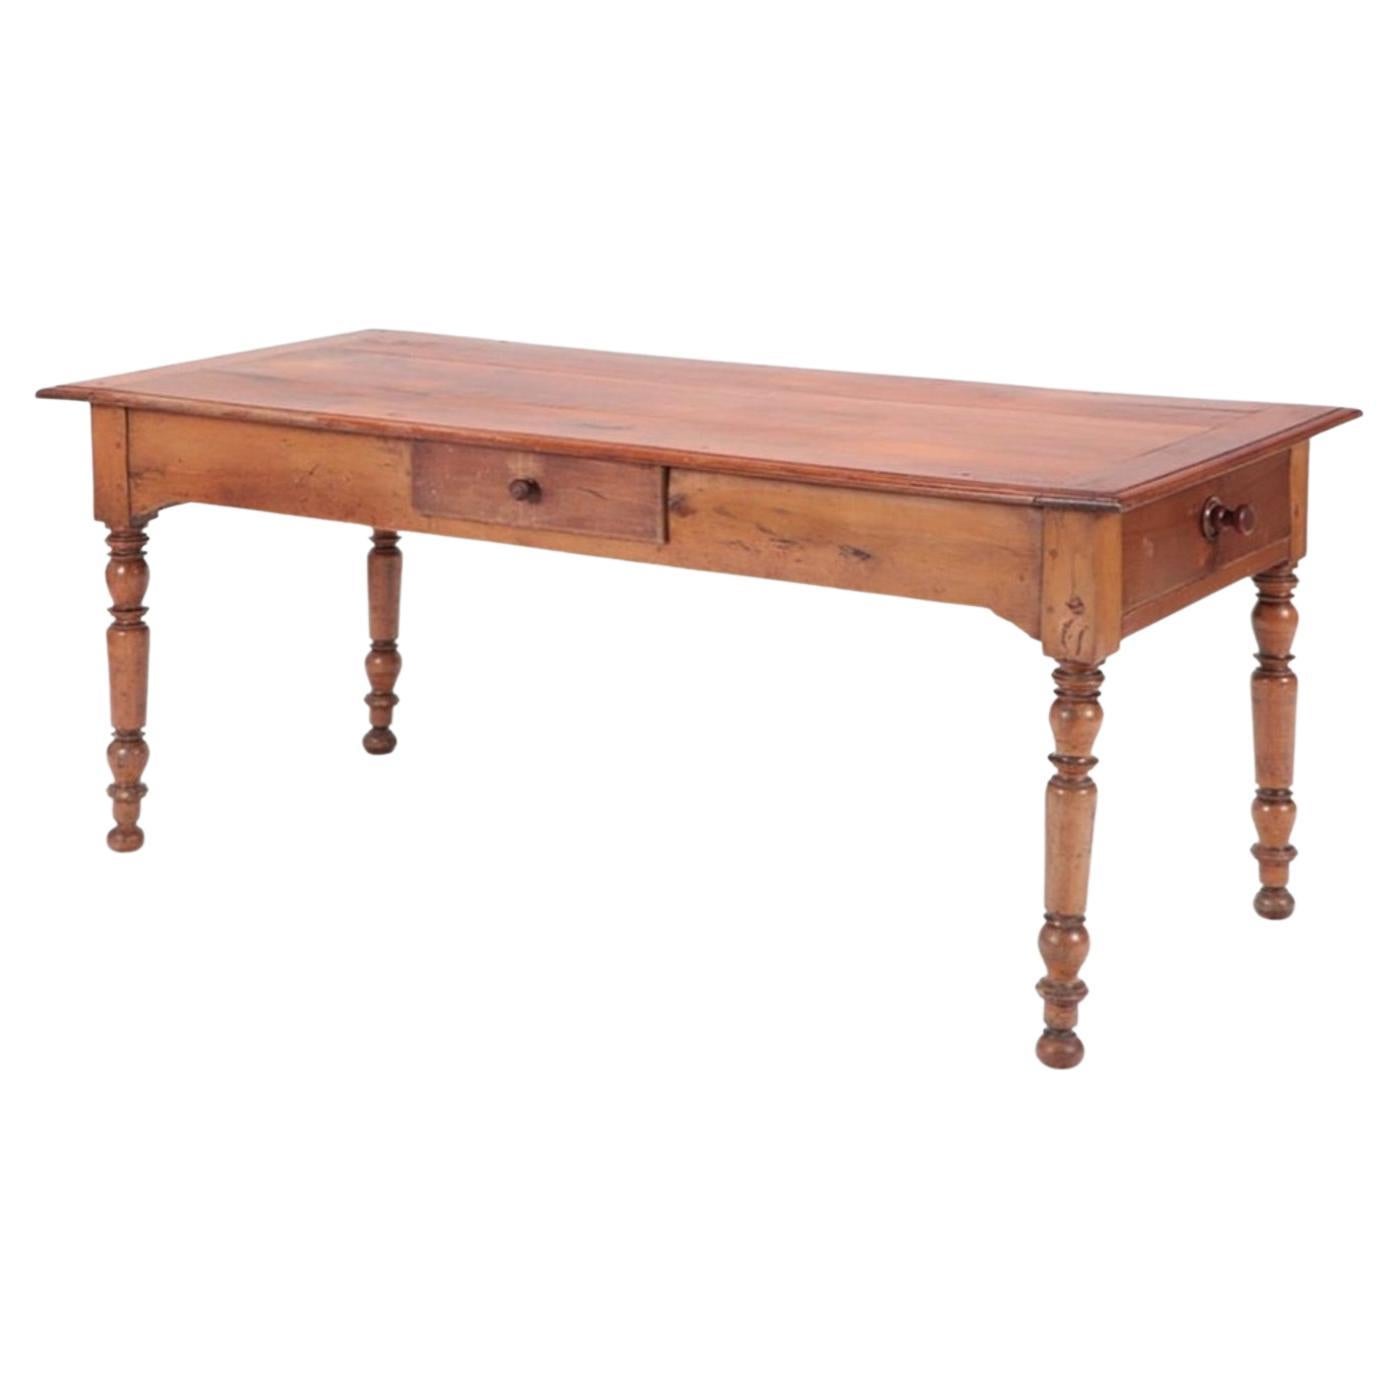 19th Century French Provincial Cherry Wood Farm Table with Turned Legs